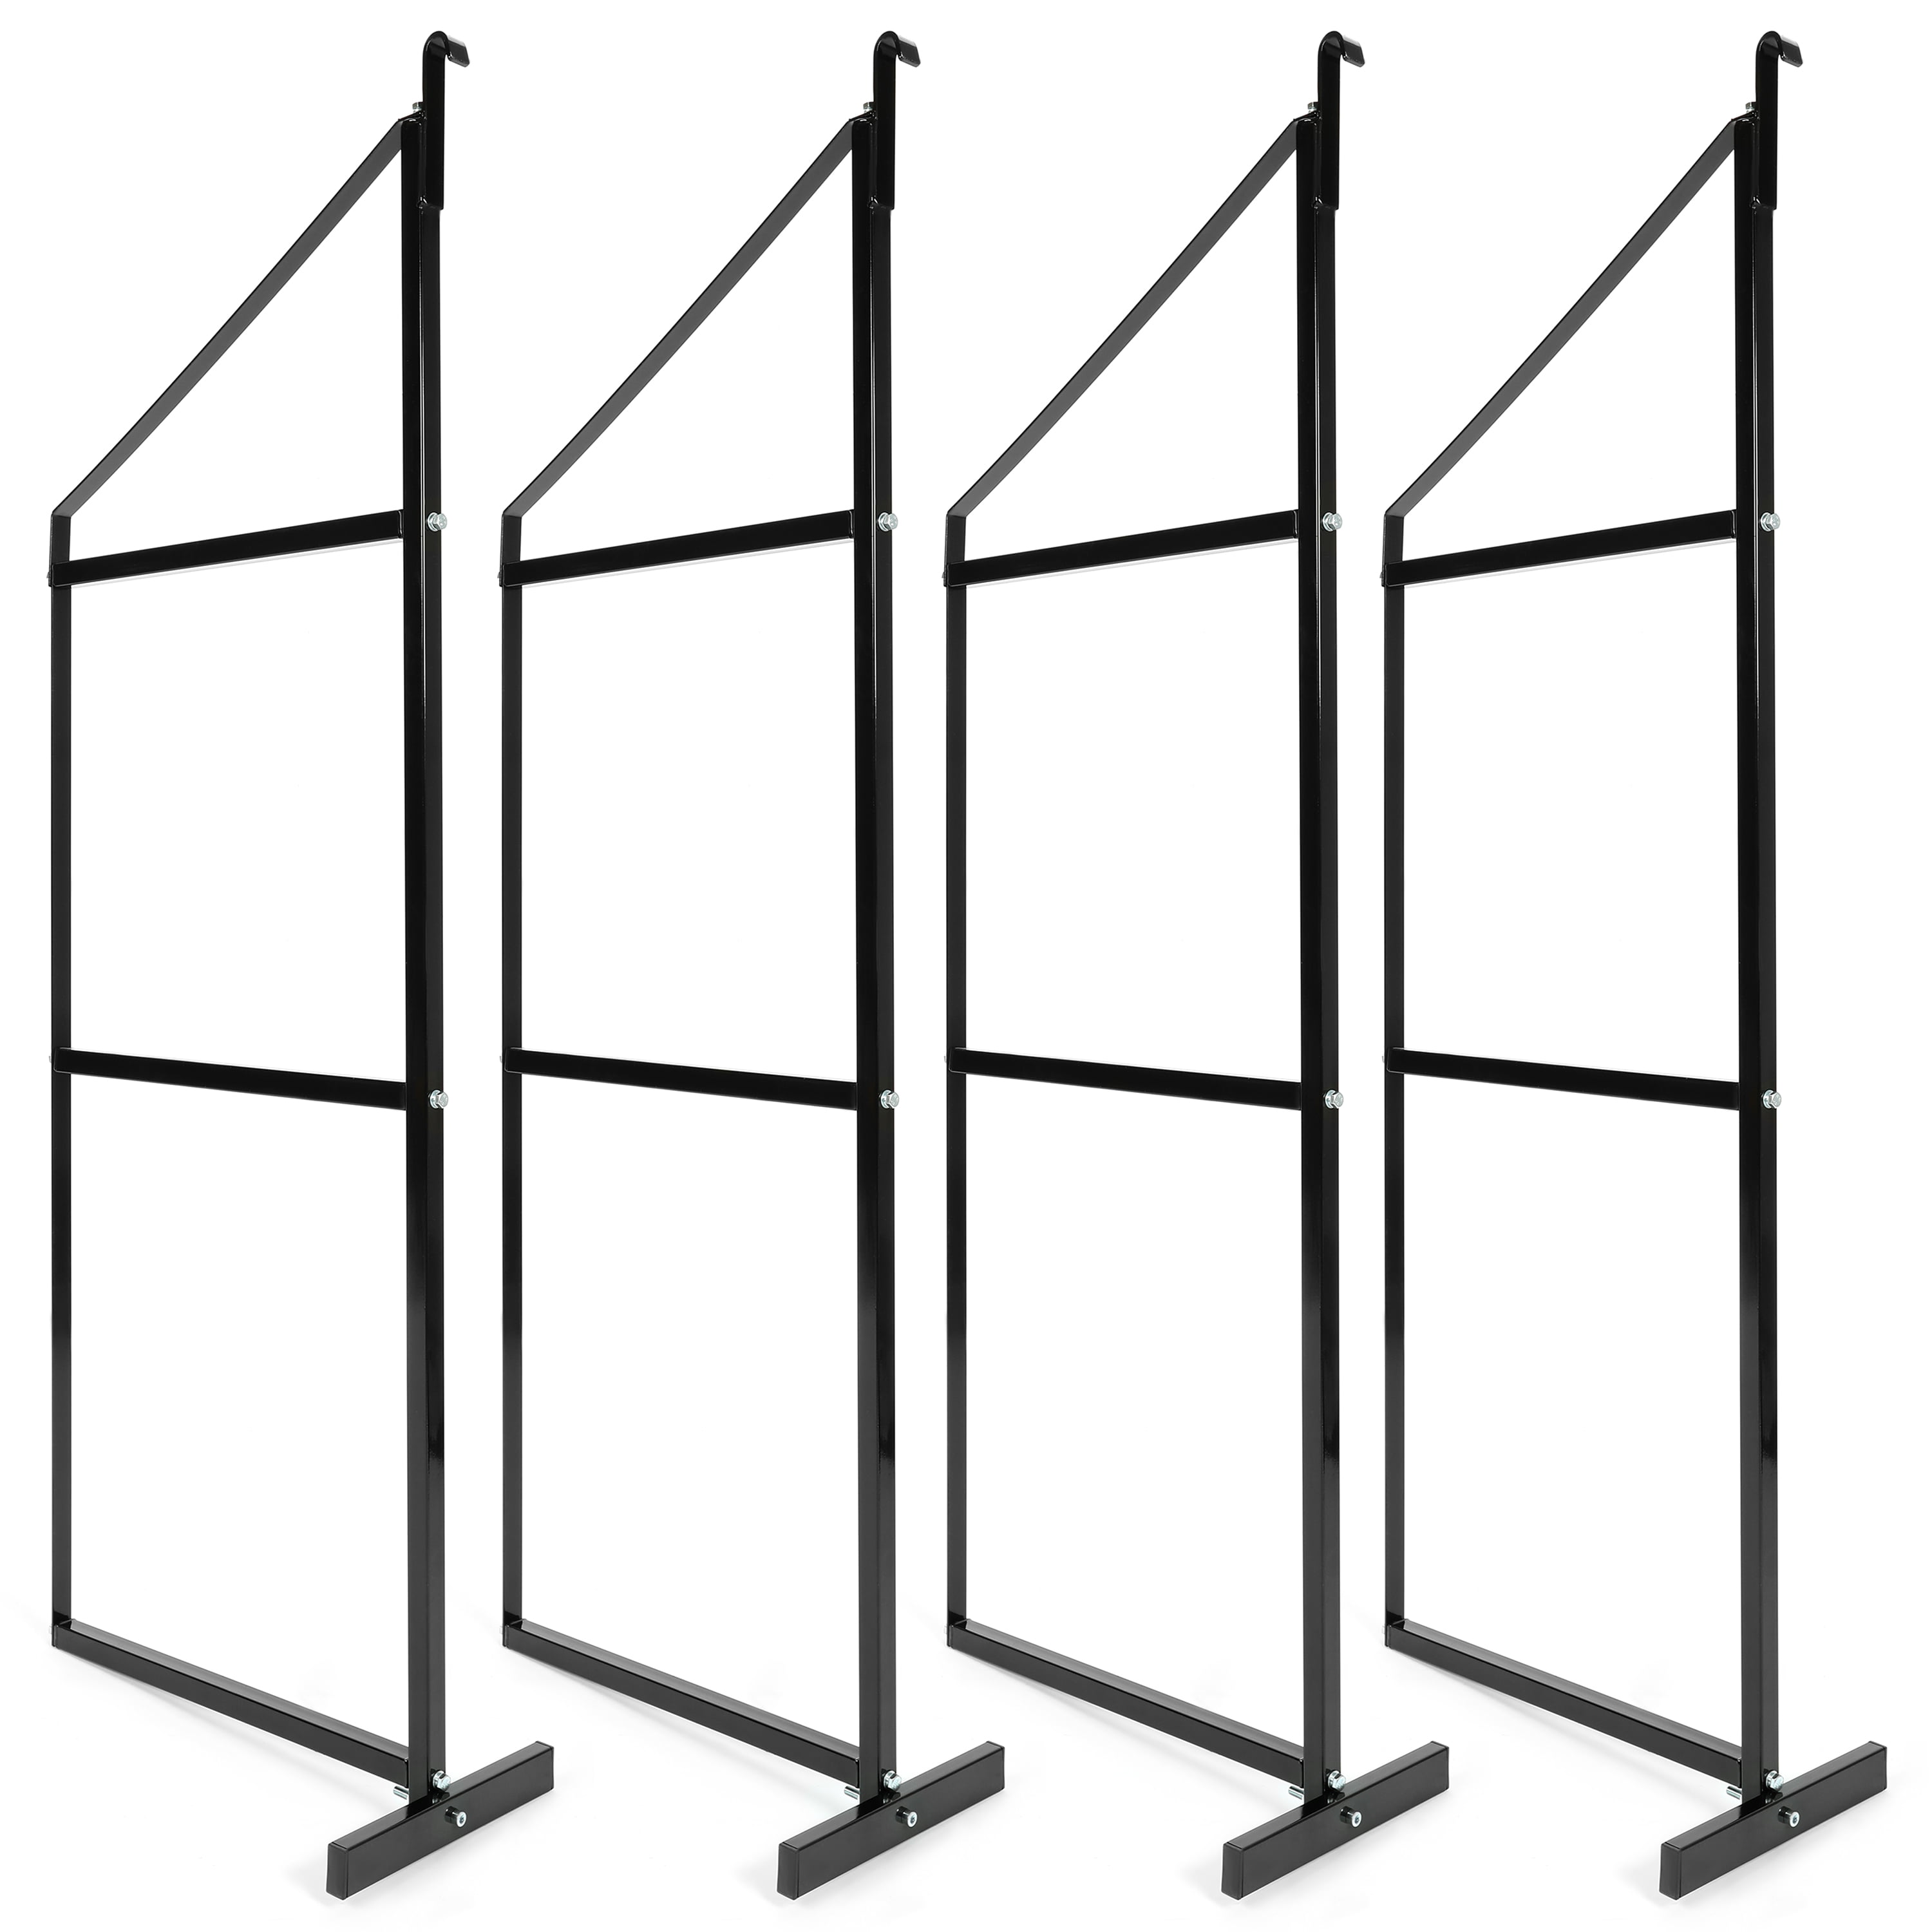 HECASA Cargo Shipping Container Shelving Brackets Instant Hook Hang Shelf Universal for Maximize Storage Cargo Space 4 Pack, Size: 61.81, Black